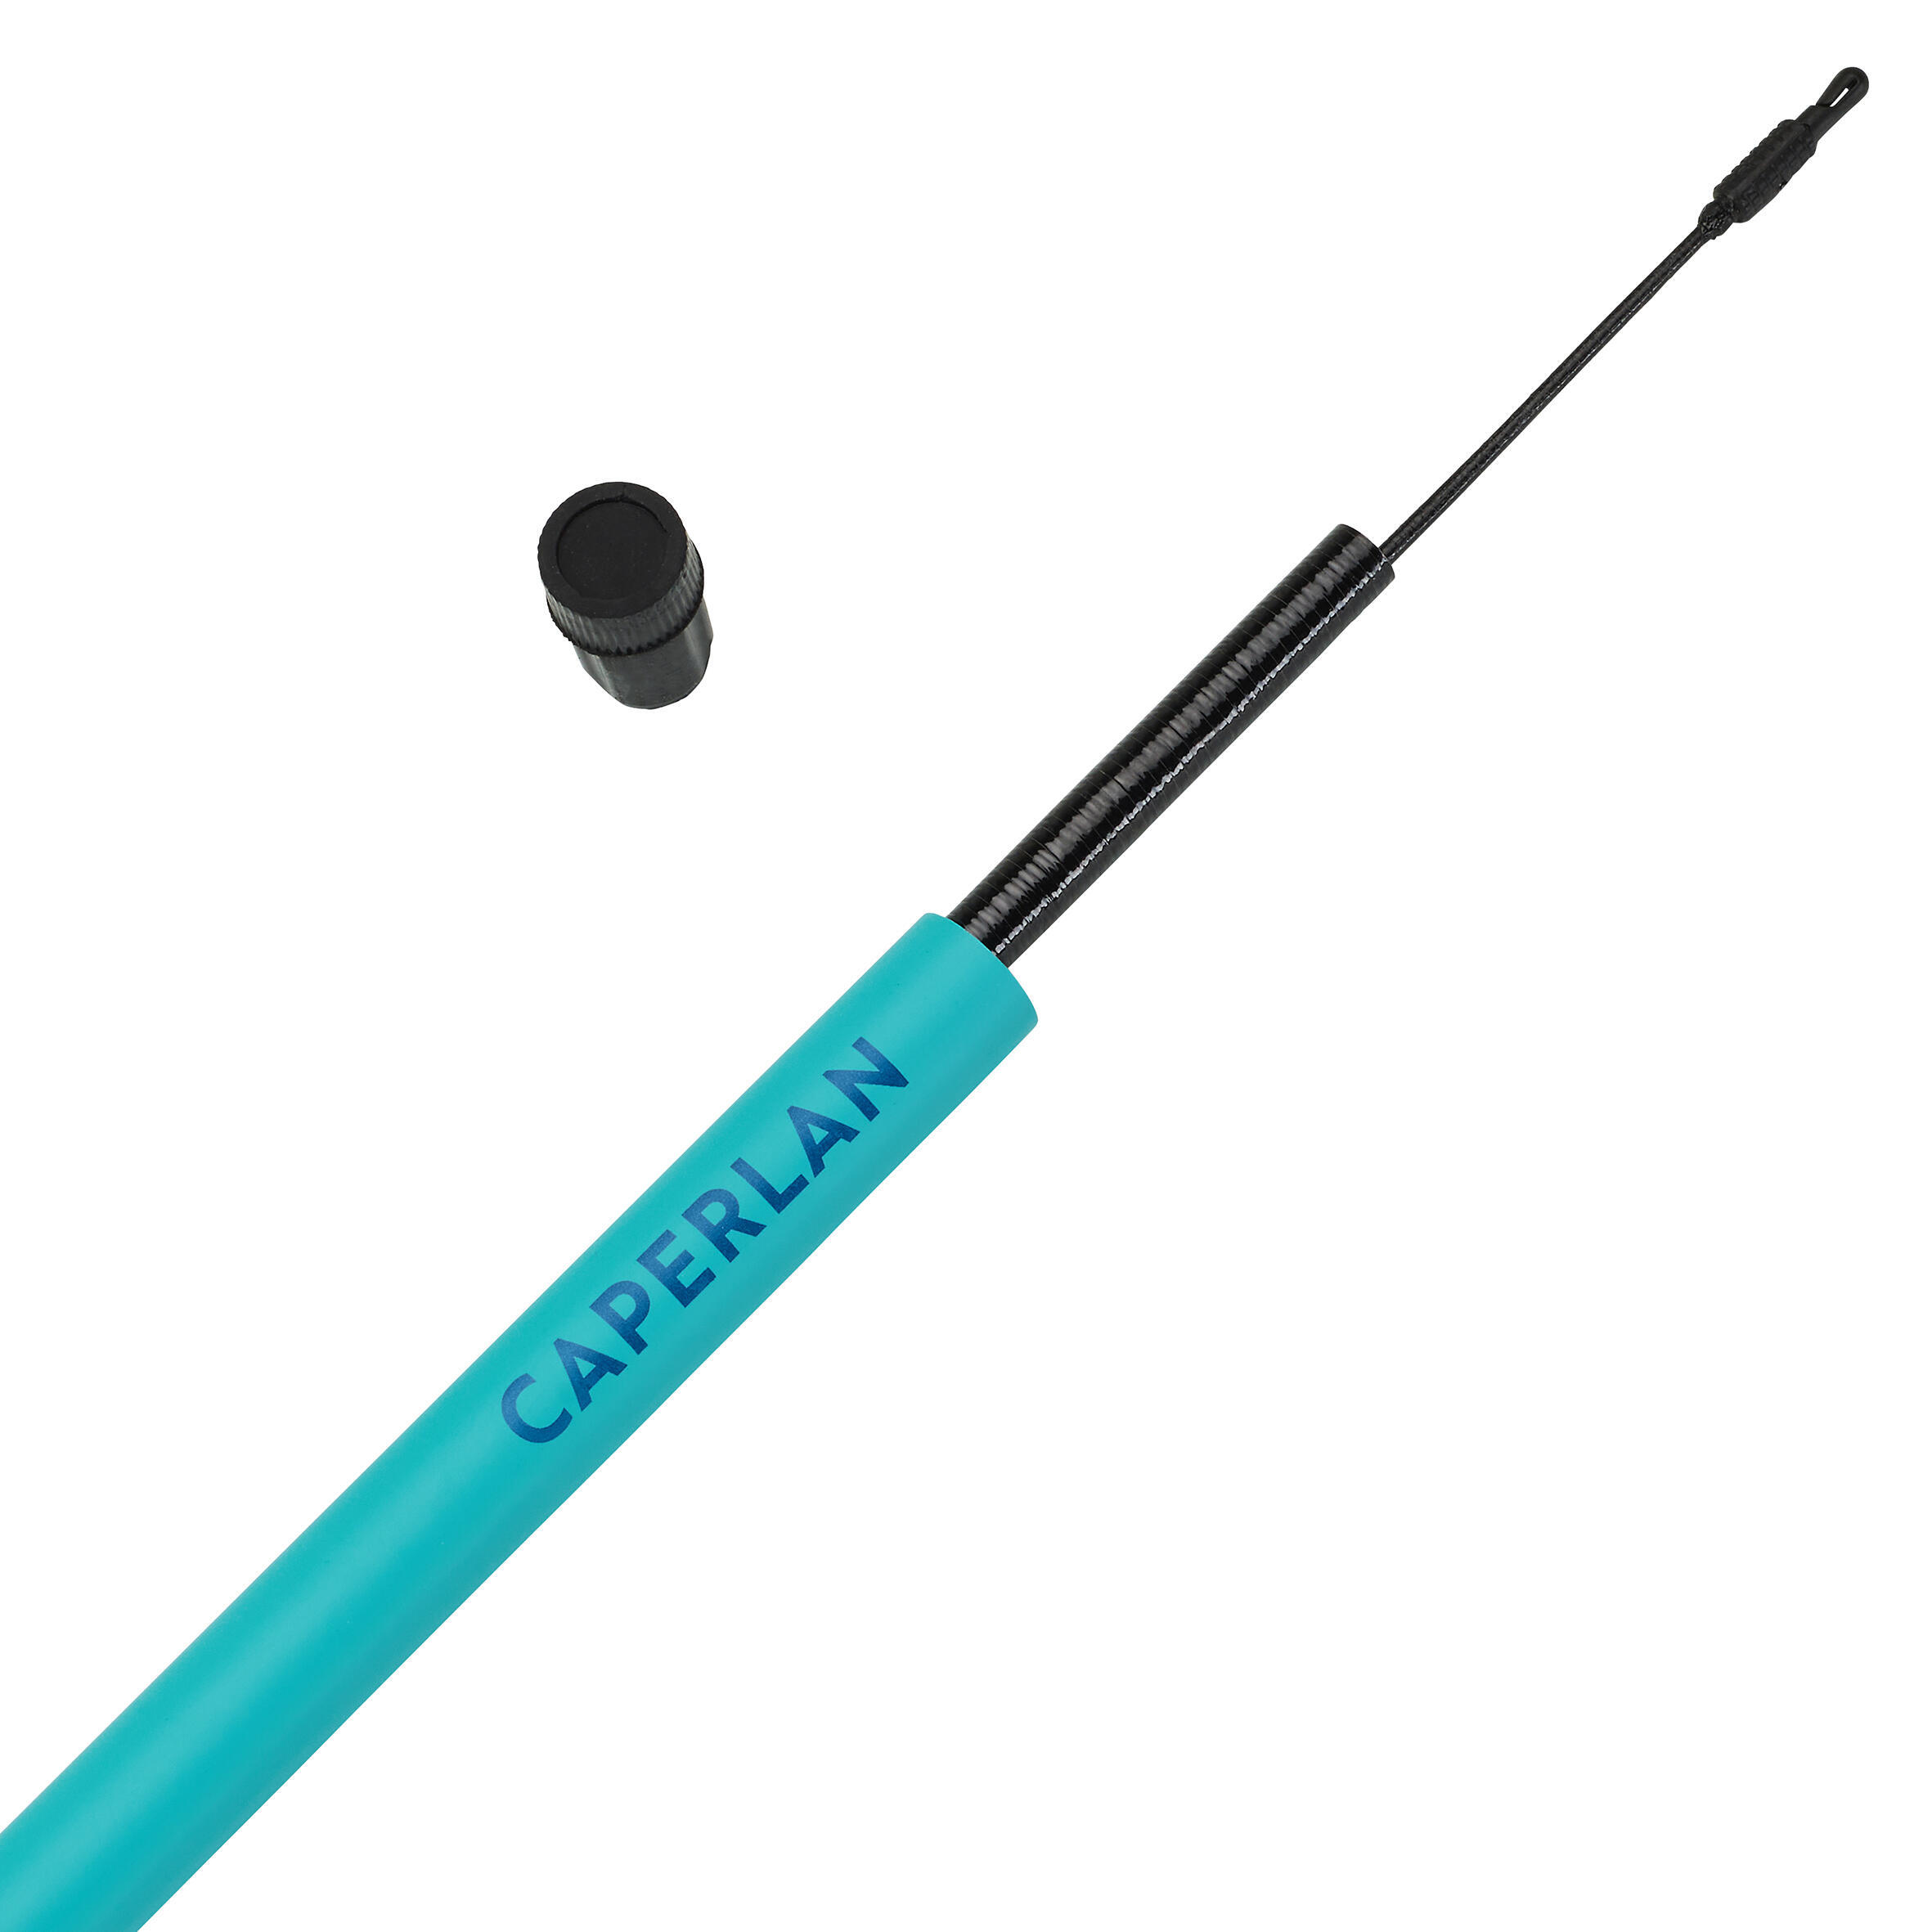 FIRSTFISH 300 Rod + Fly-line outfit for still fishing. 5/8